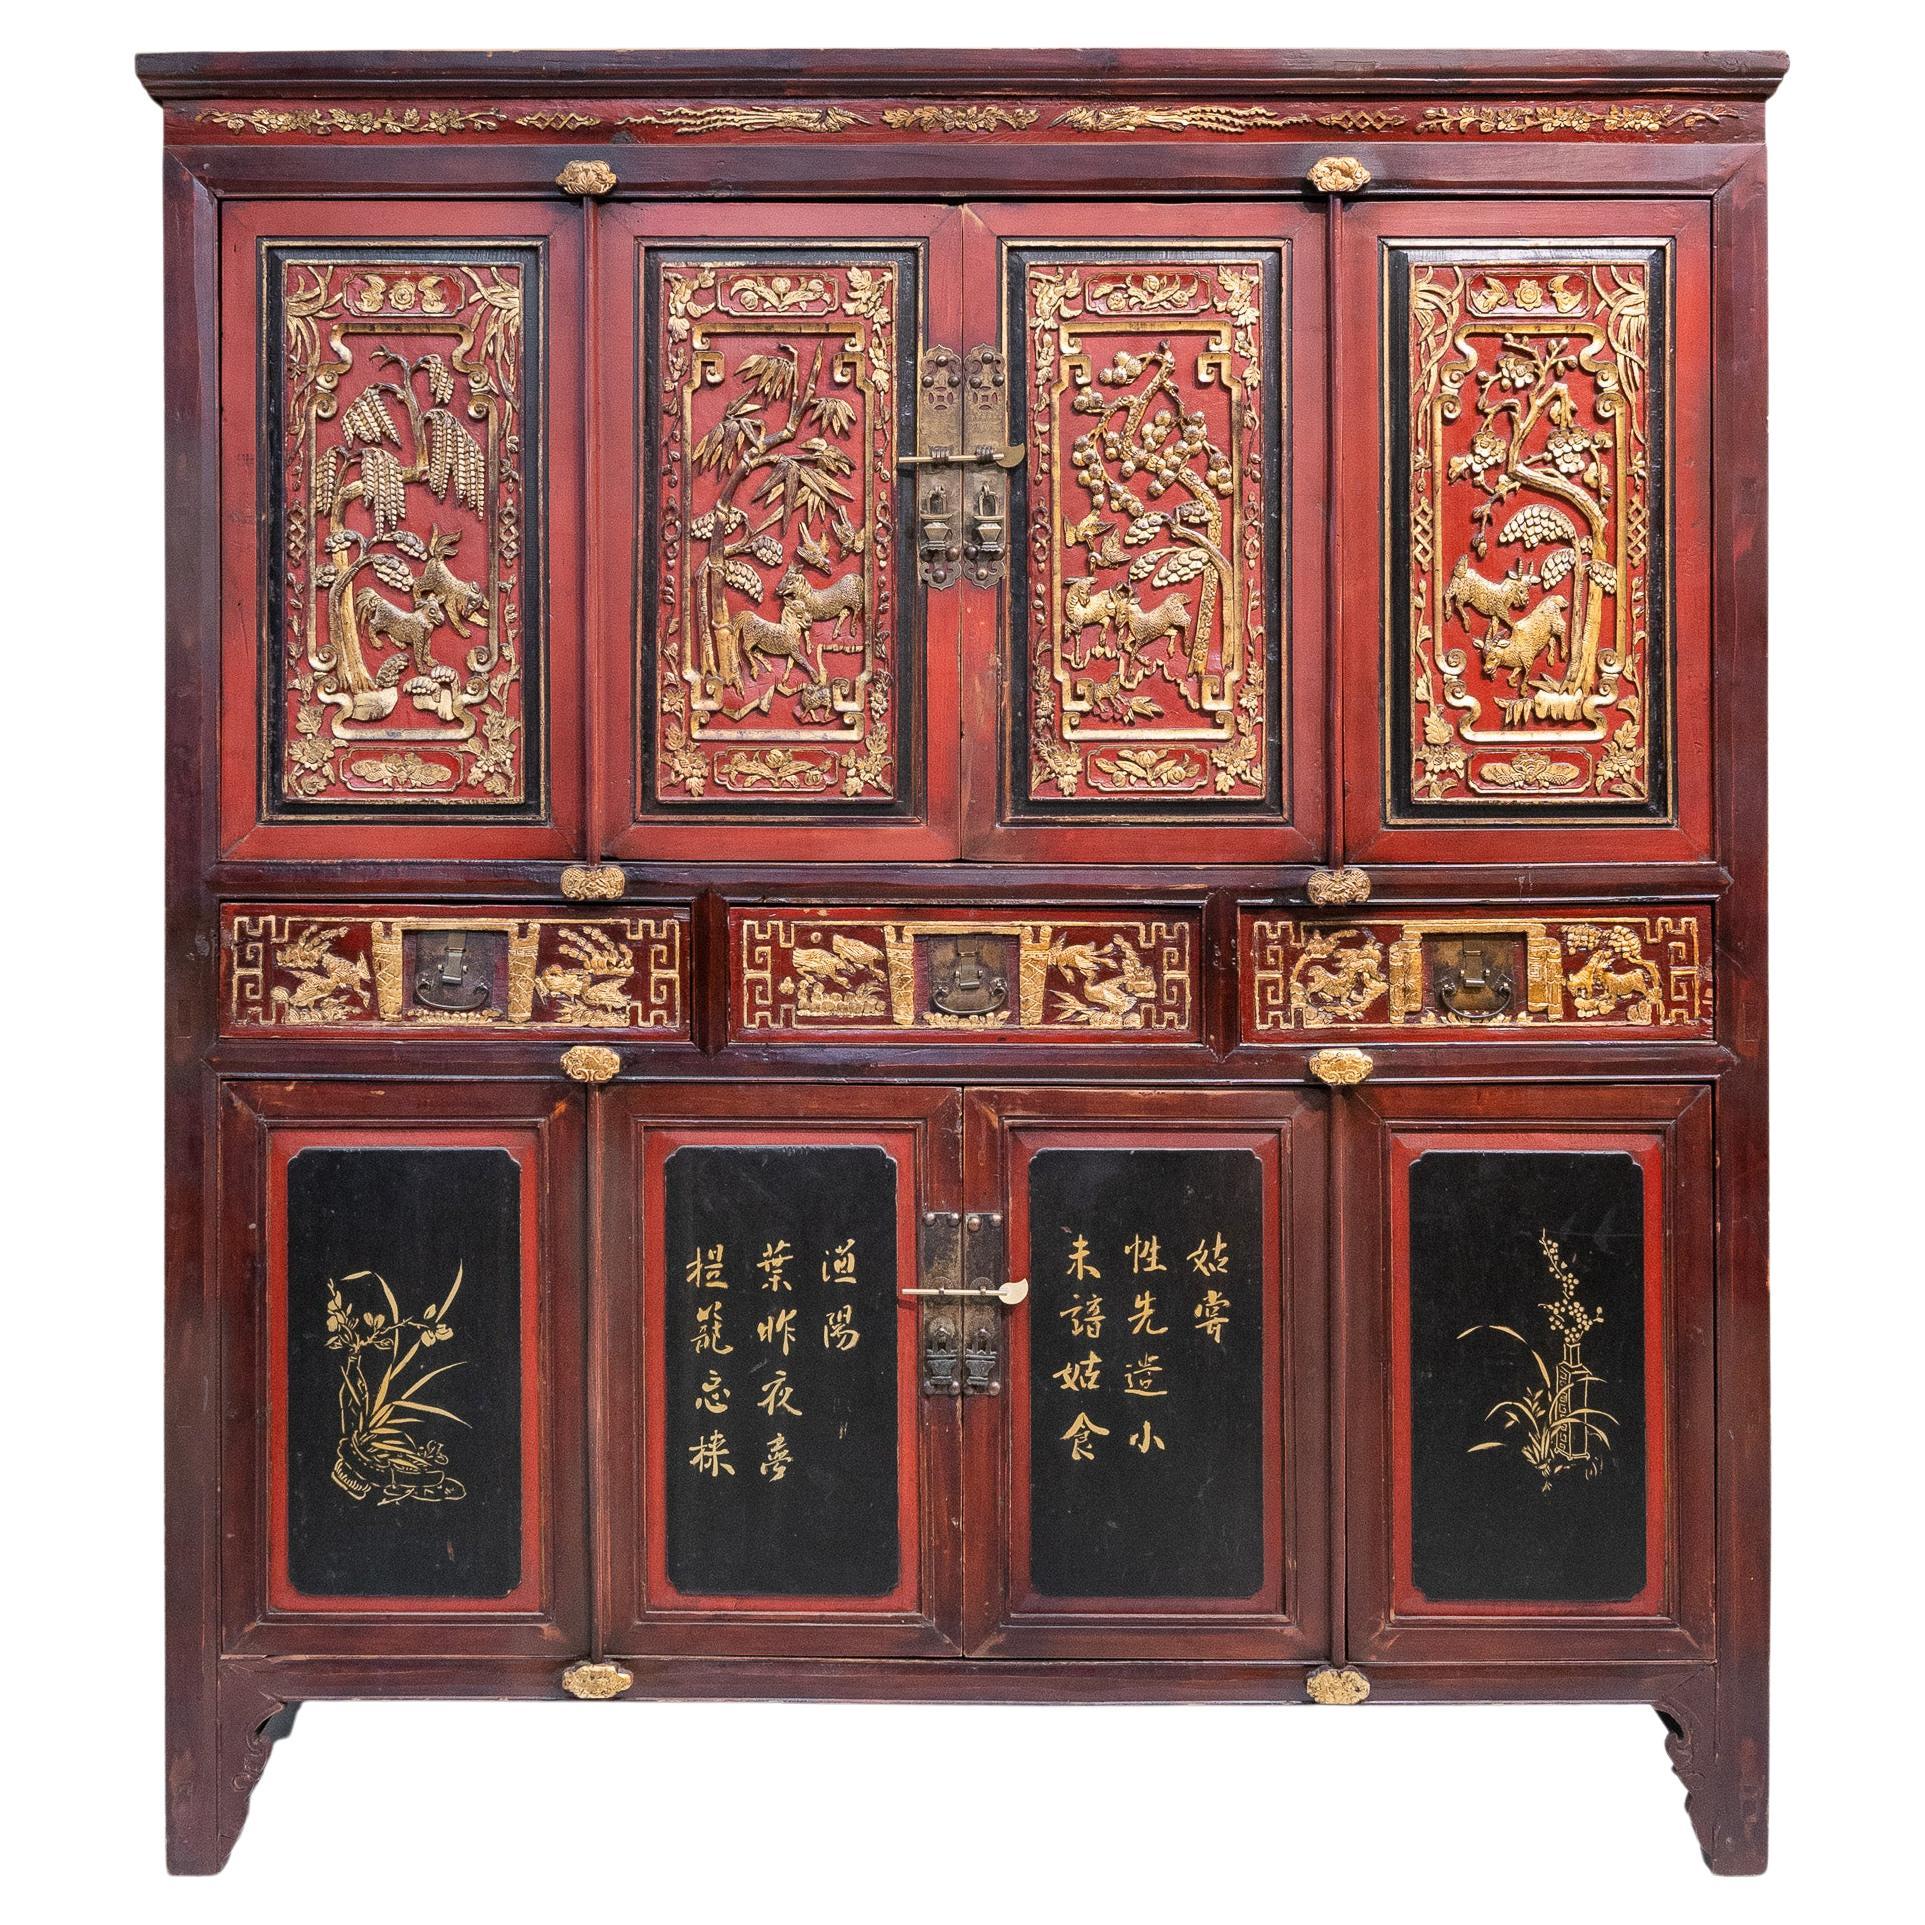 Late 19th Century Large Carved Cabinet from Dong Yang, Zhejiang, China